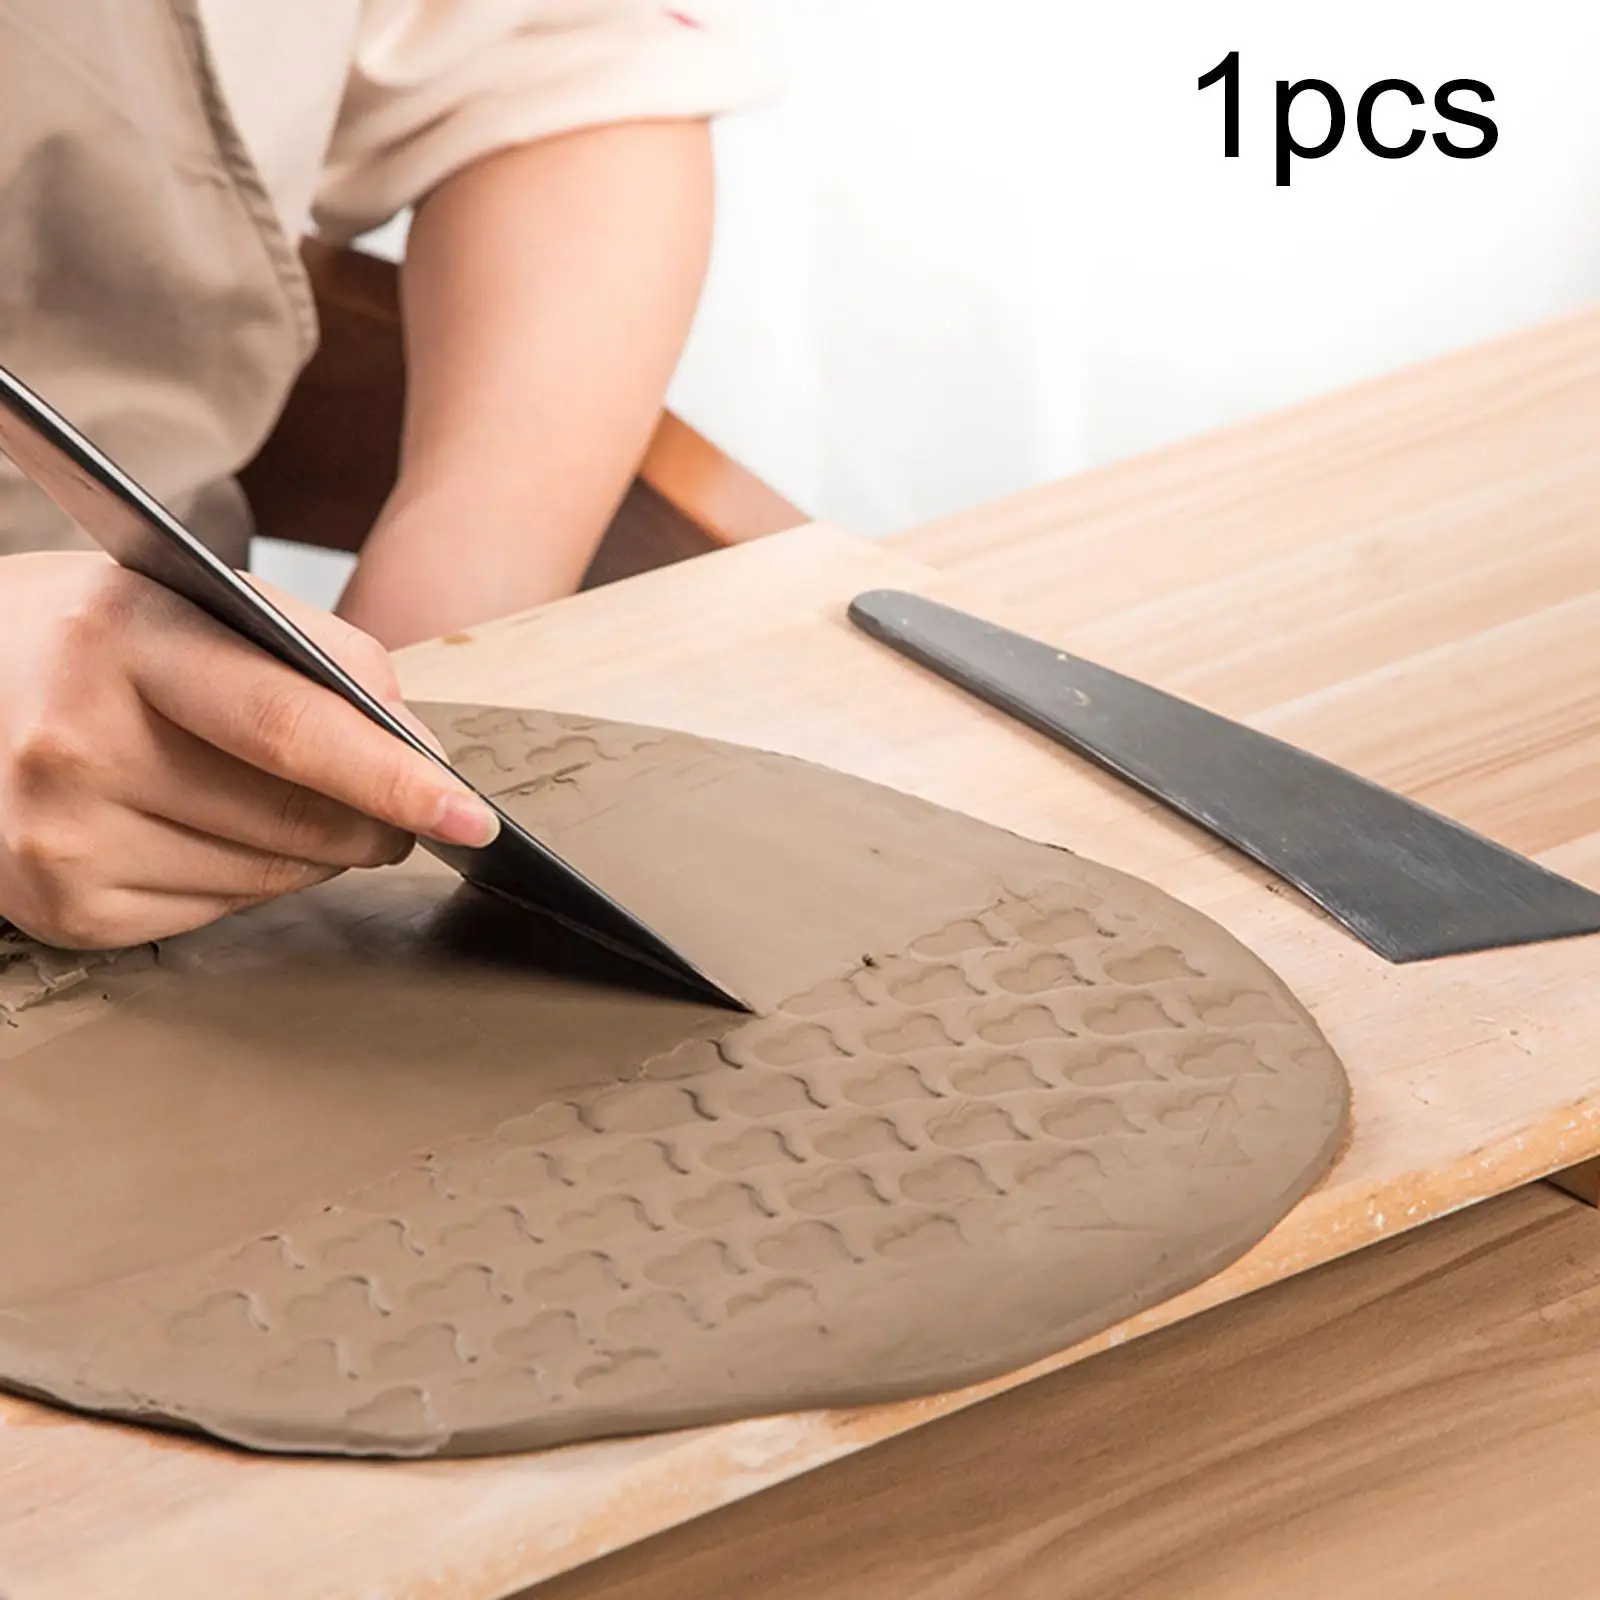 Pottery Scraper Horn Practical Professional Shaping Clay Sculpting Tools